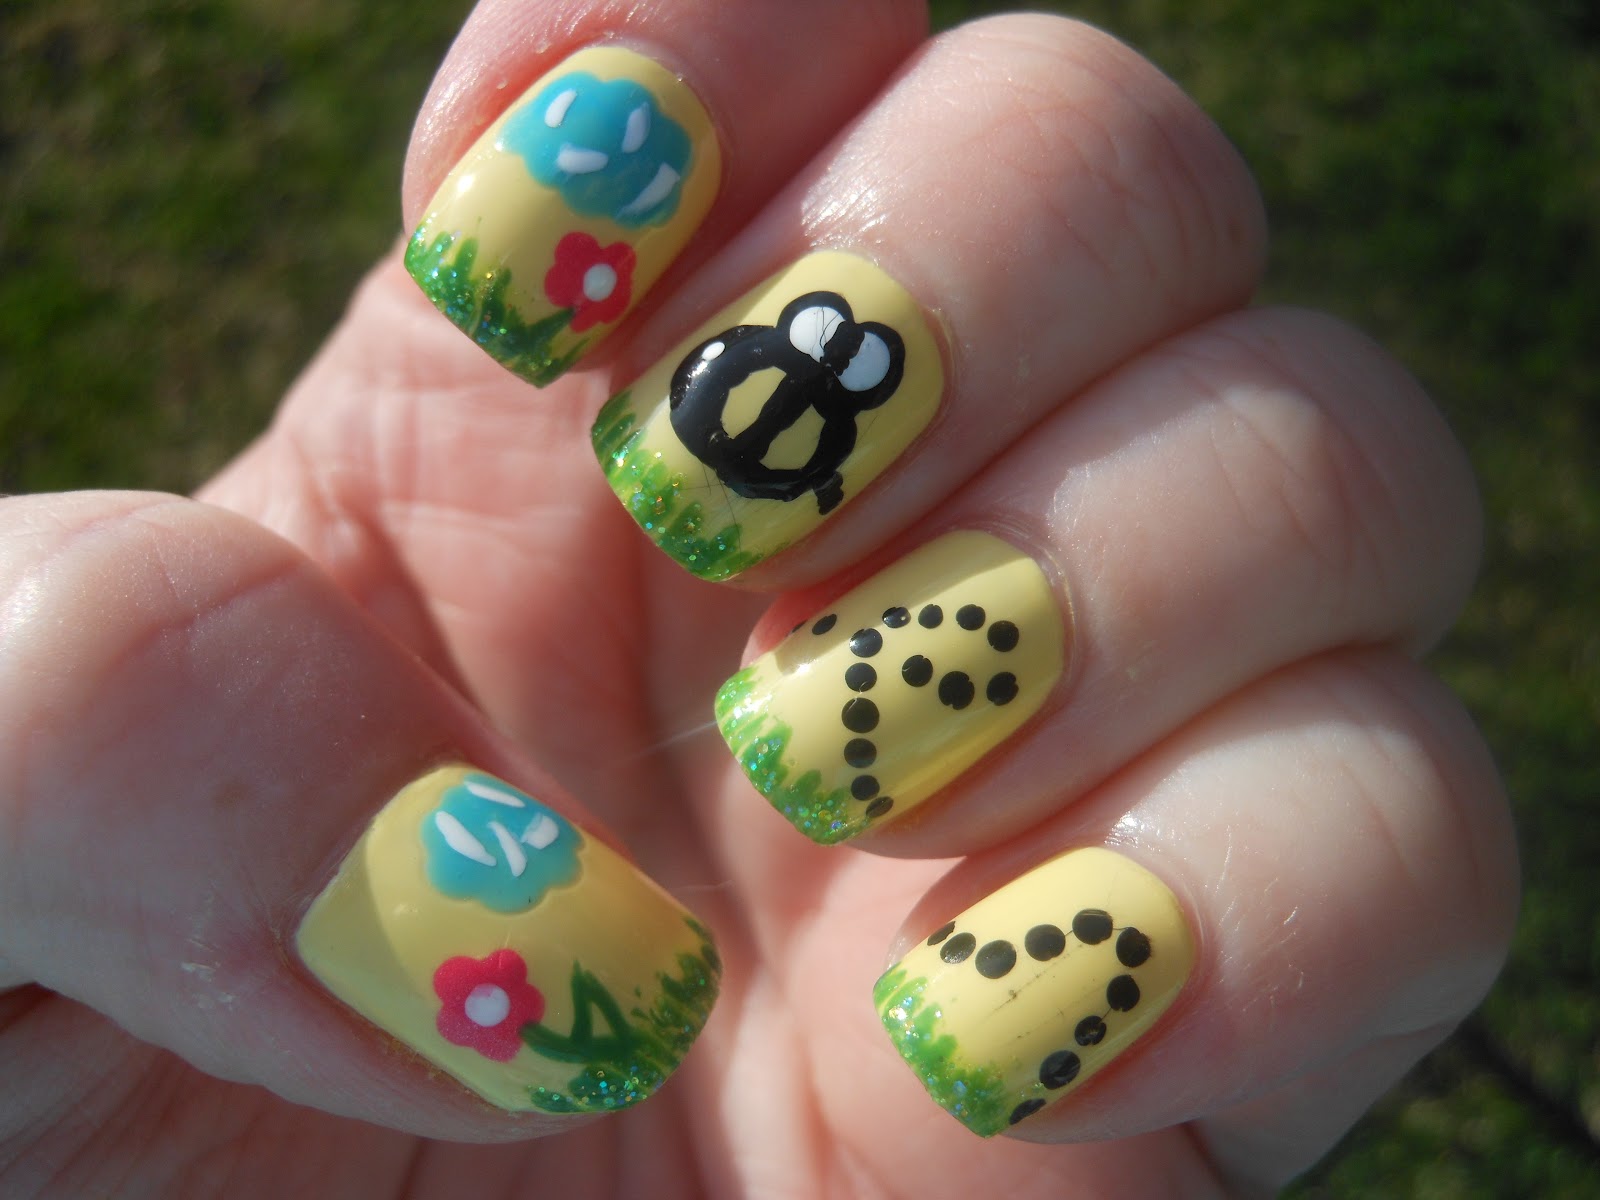 3. "Cute Bumble Bee Nail Tutorial for Beginners" - wide 3